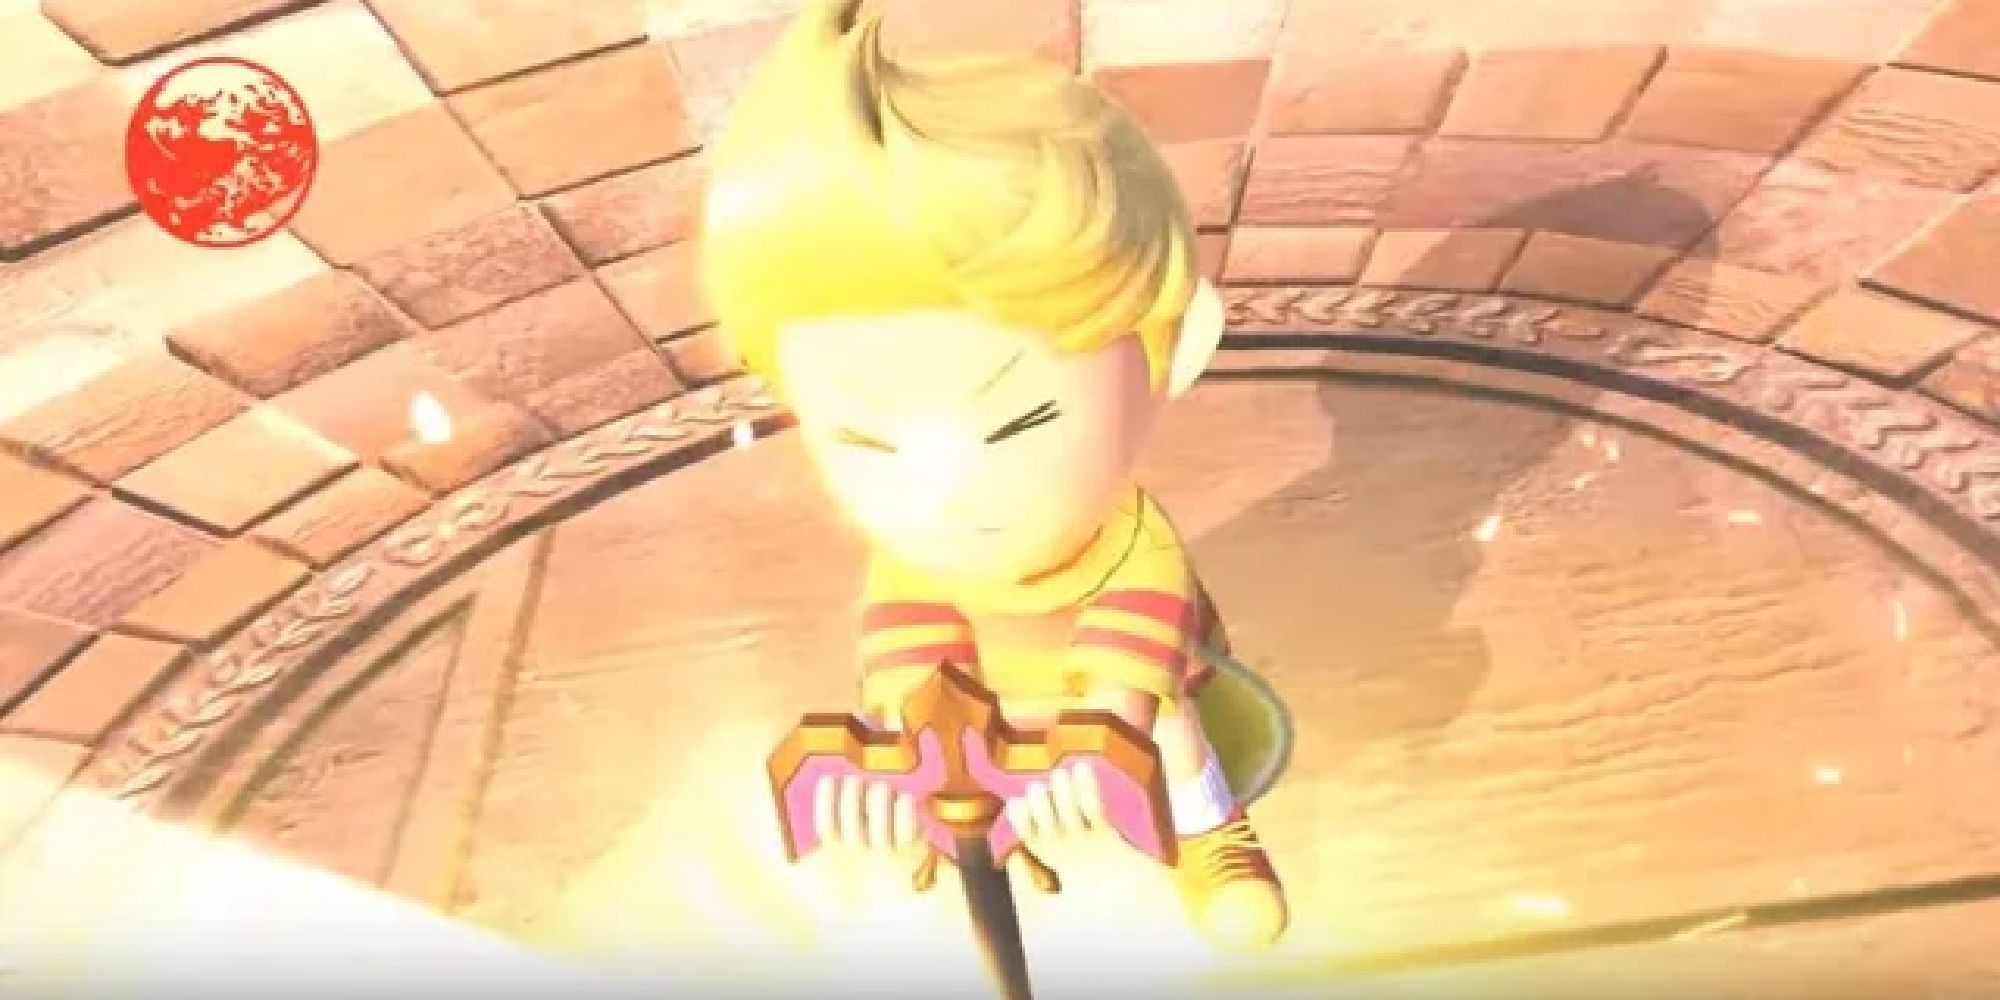 Lucas pulling one of the Seven Needles from the ground in his victory screen